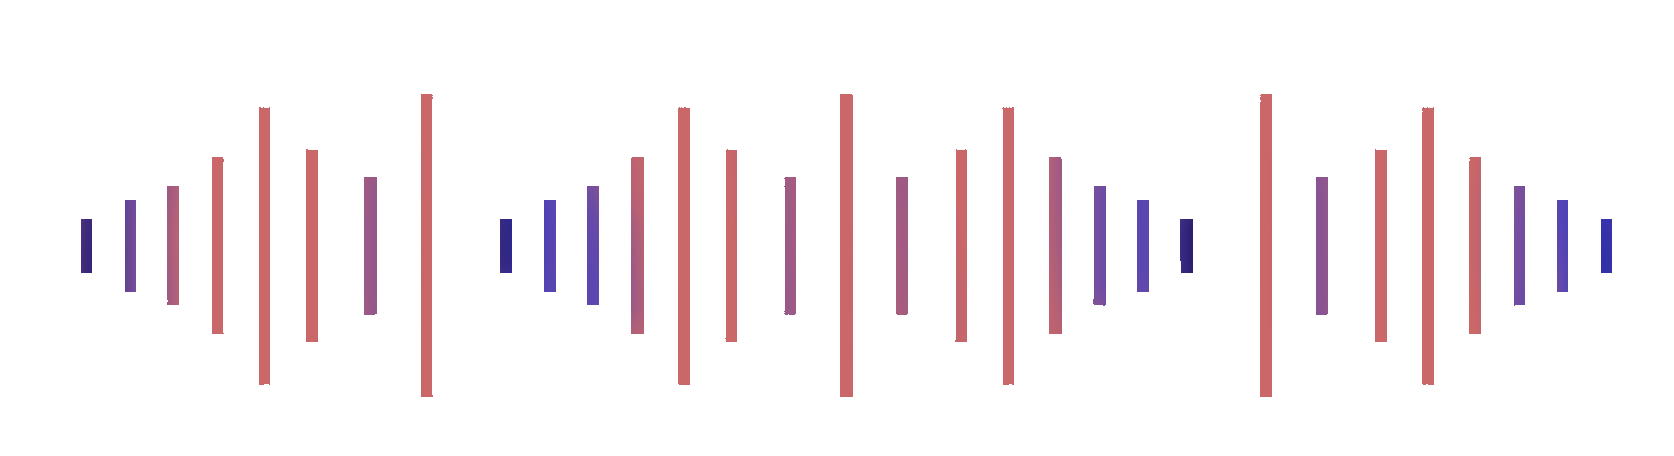 A minimal audio wave form in pink and blue.